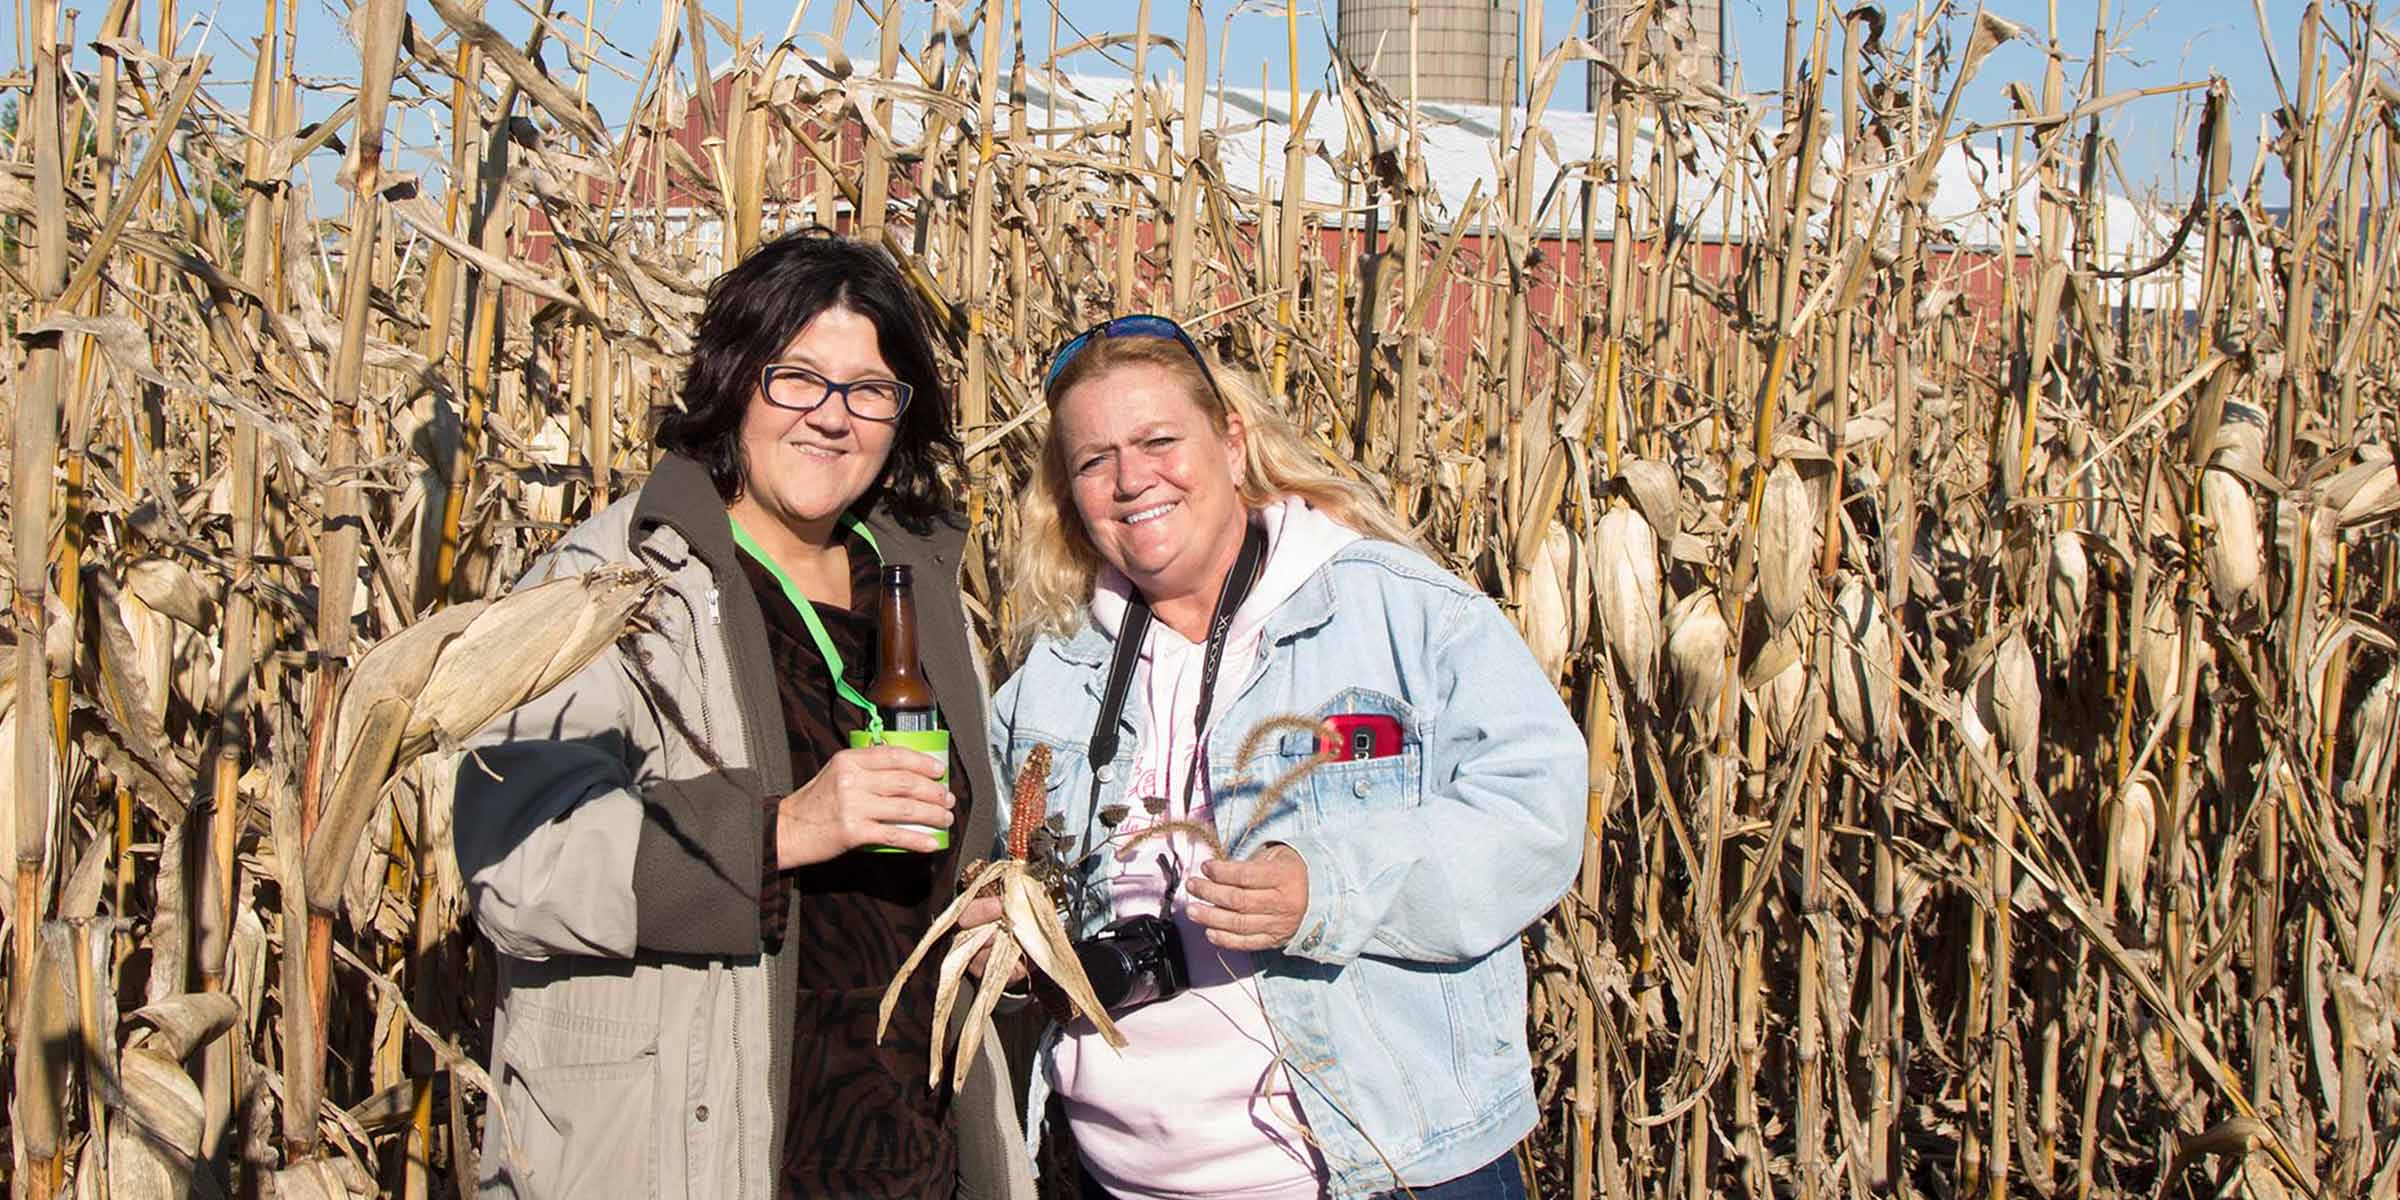 two women with drinks in a cornfield